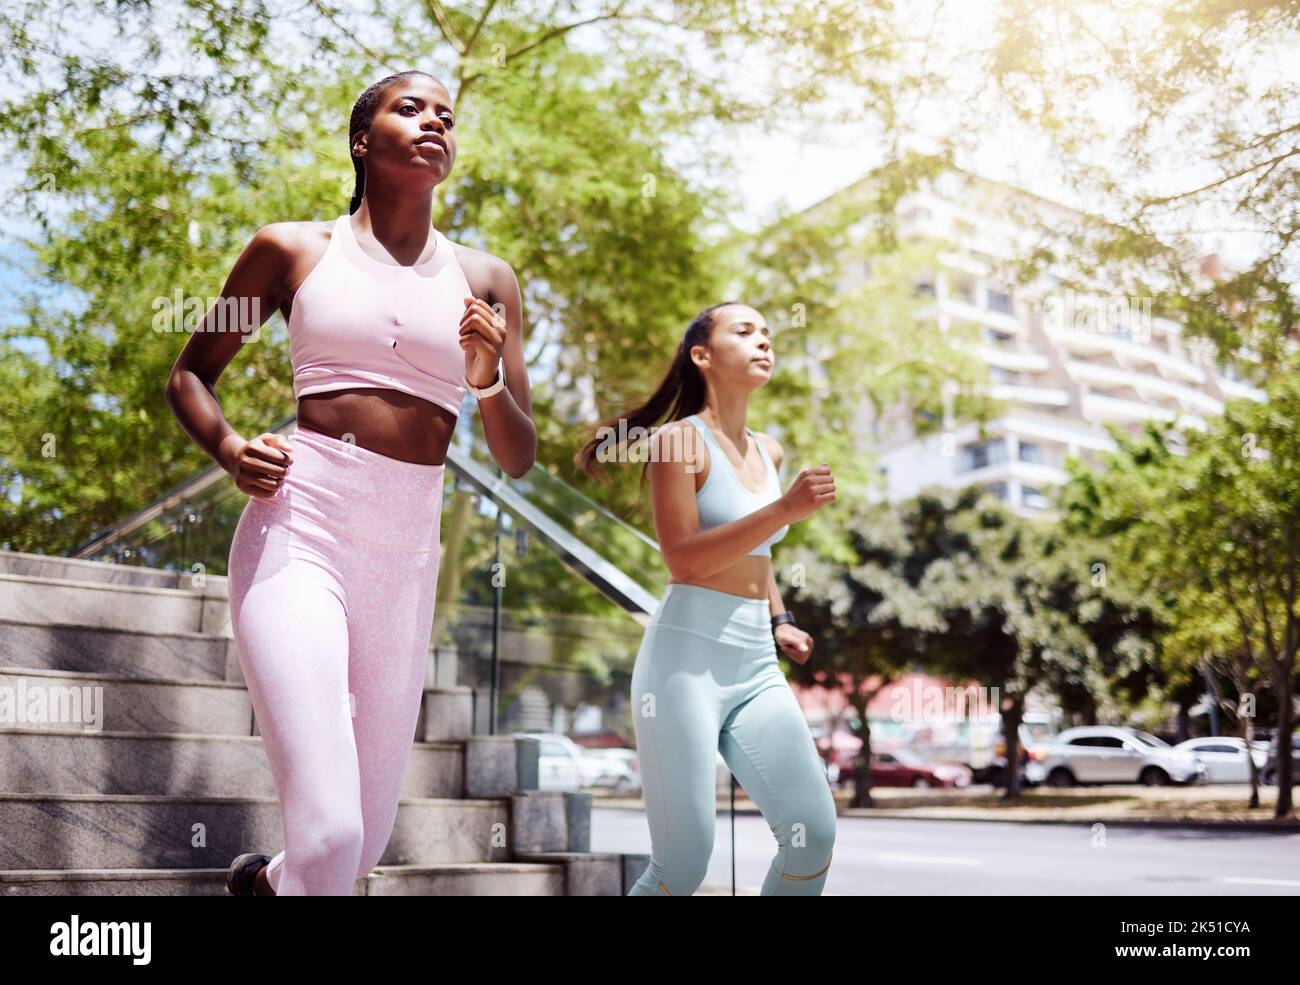 Fitness friends, city running and women exercise together for healthy lifestyle, wellness and marathon training in urban outdoors. Focus athletes Stock Photo